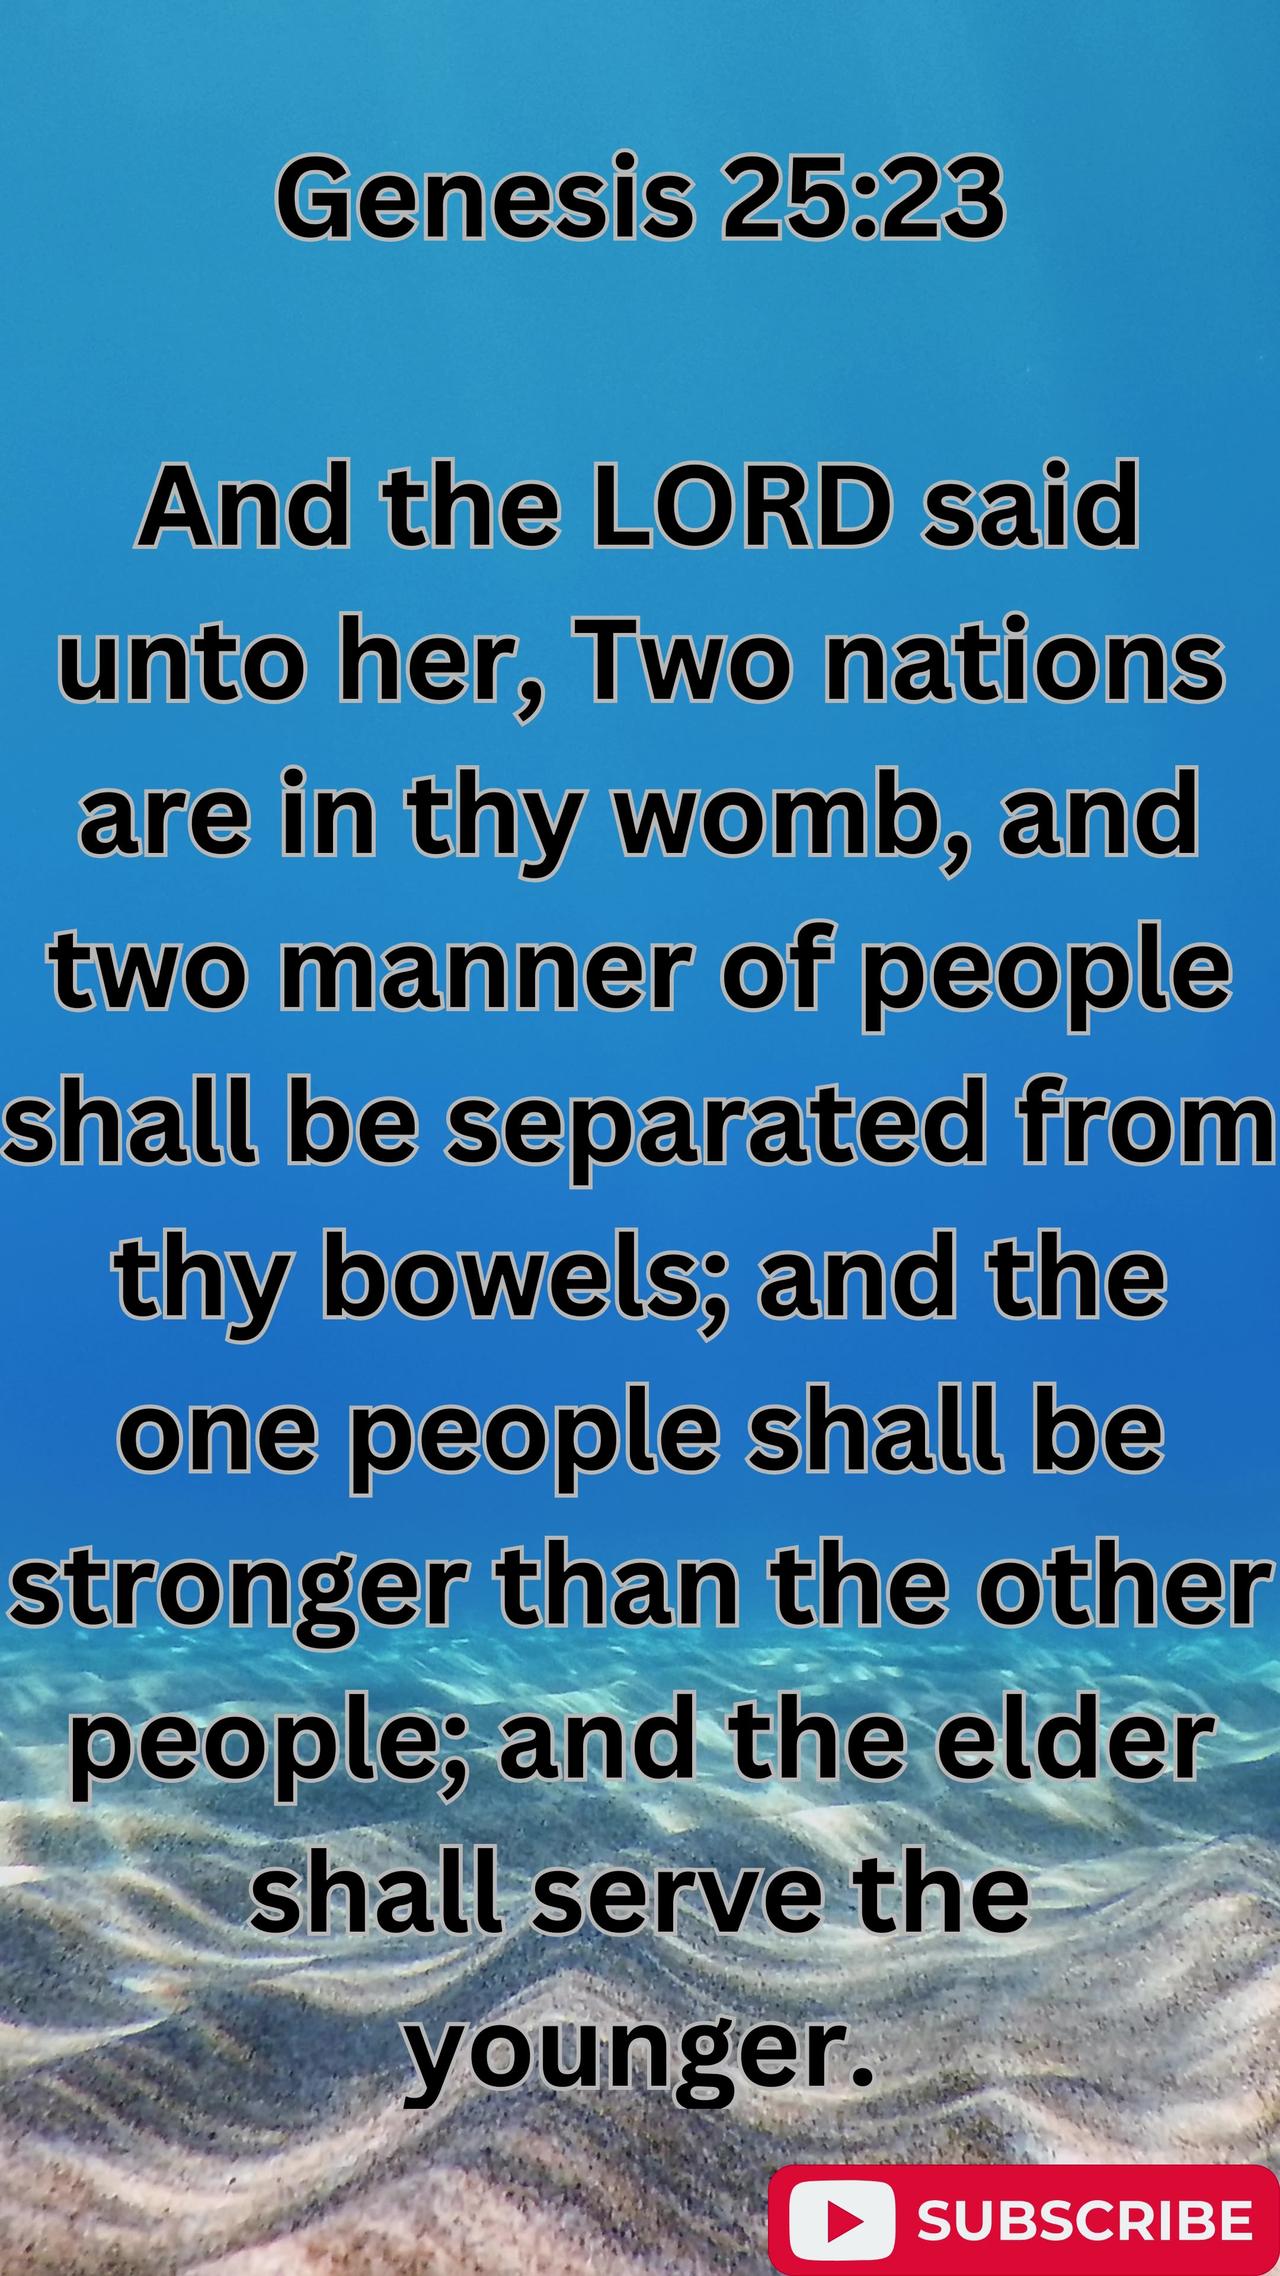 "Jacob and Esau: A Prophecy of Two Nations"Genesis 25:23